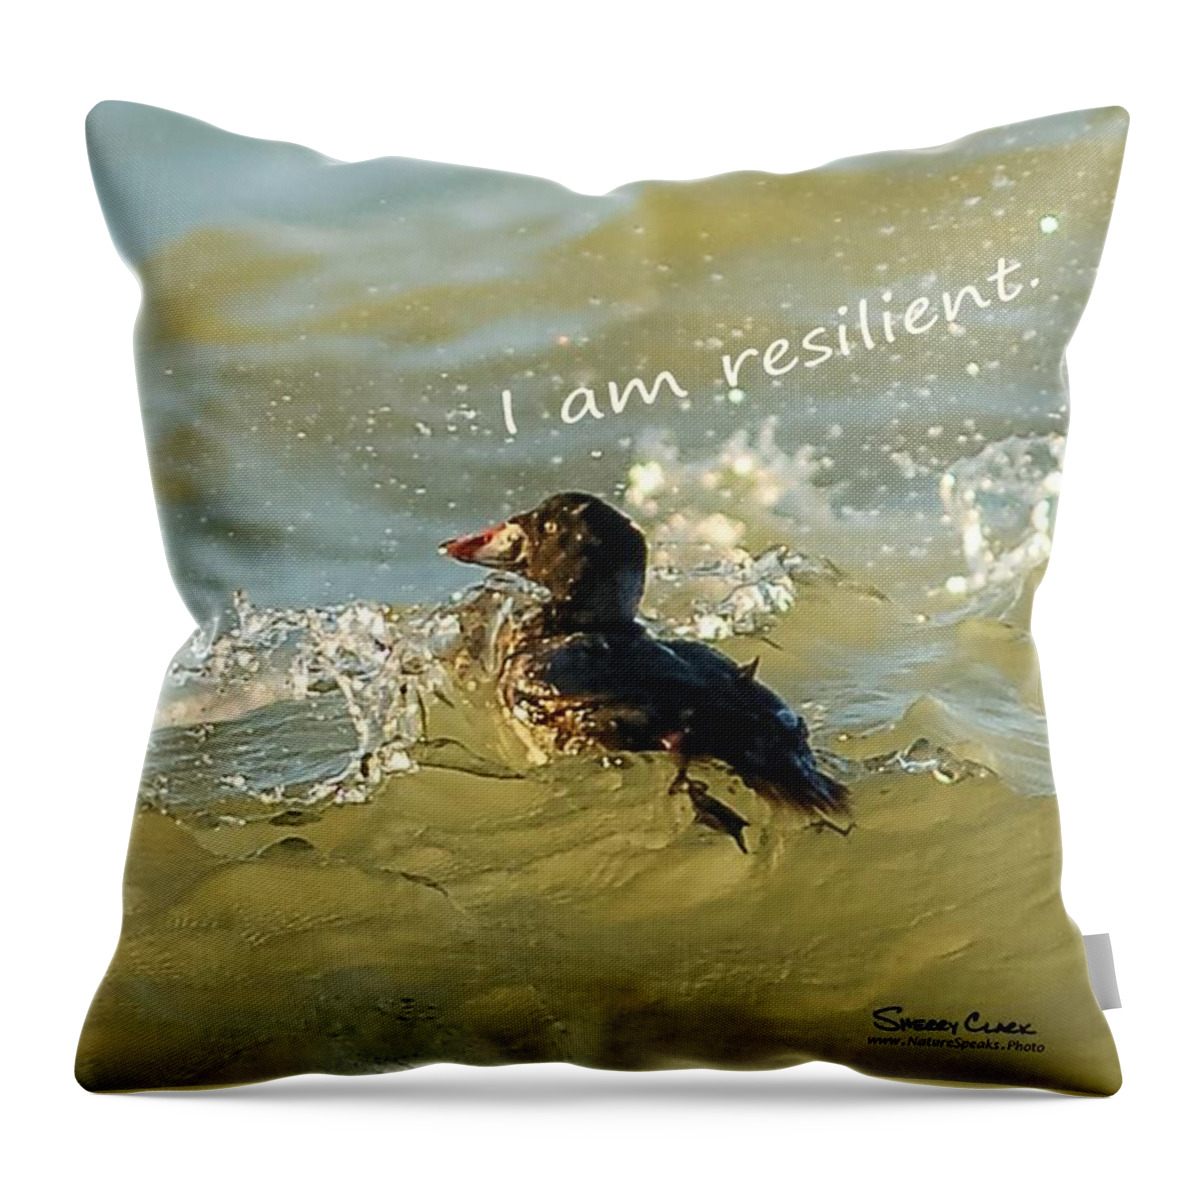  Throw Pillow featuring the photograph Surf Scoter says I am Resilient by Sherry Clark